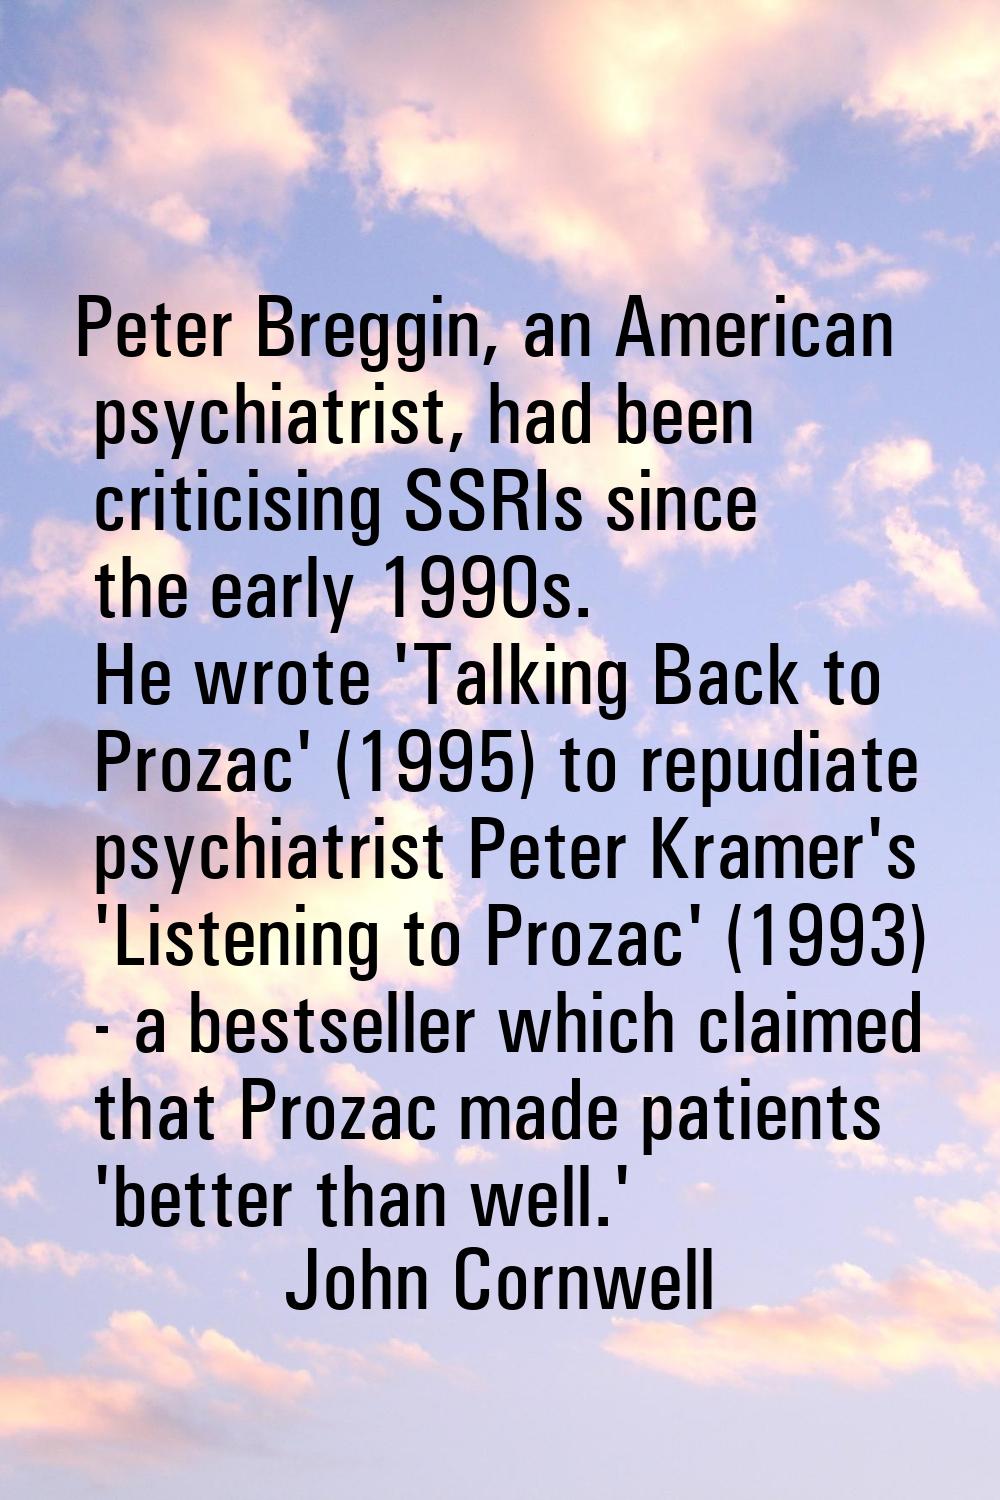 Peter Breggin, an American psychiatrist, had been criticising SSRIs since the early 1990s. He wrote